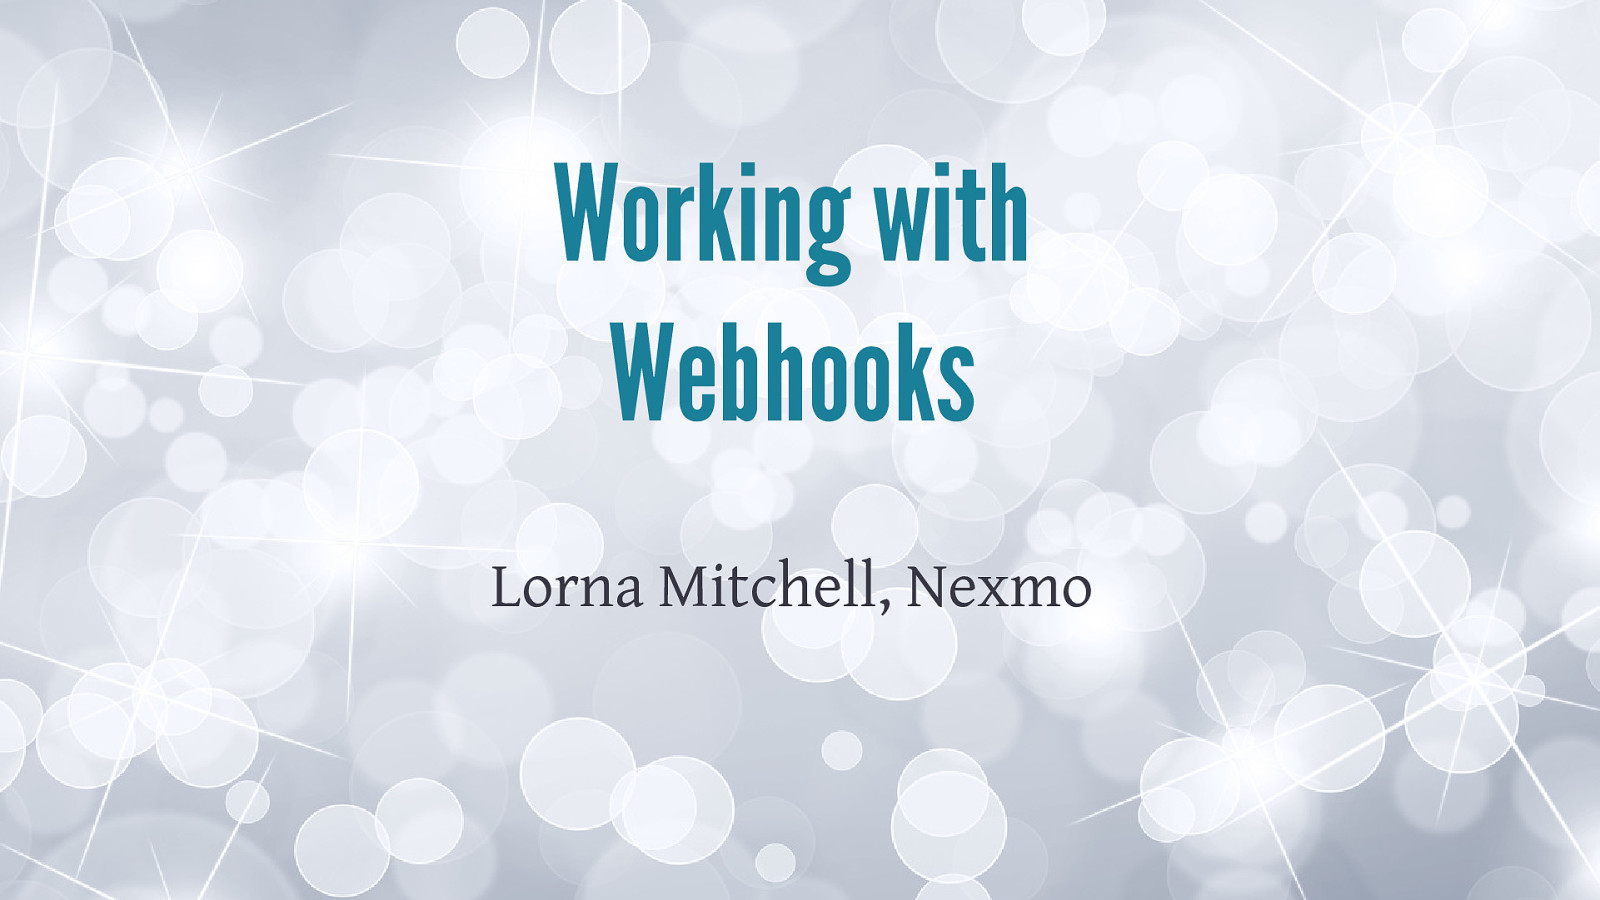 Working with Webhooks